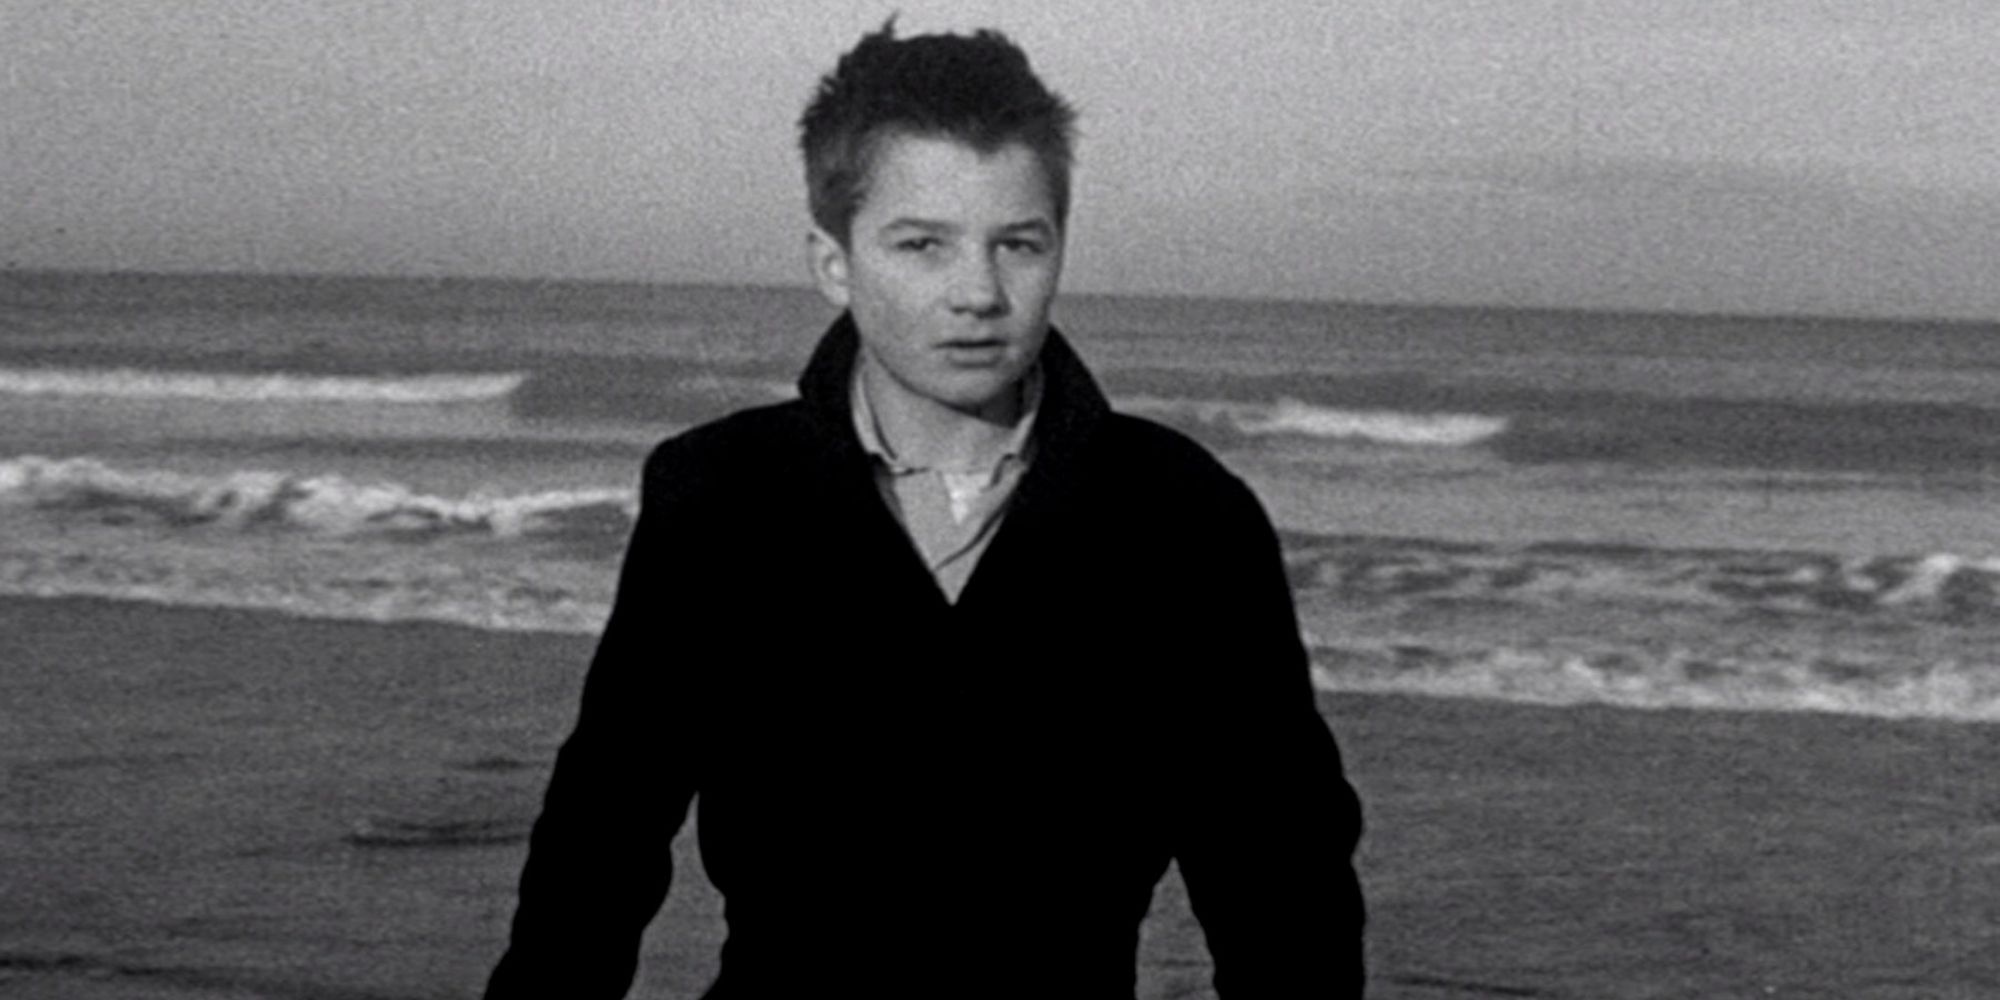 Jean-Pierre Léaud as Antoine Donel standing on a beach in The 400 Blows.